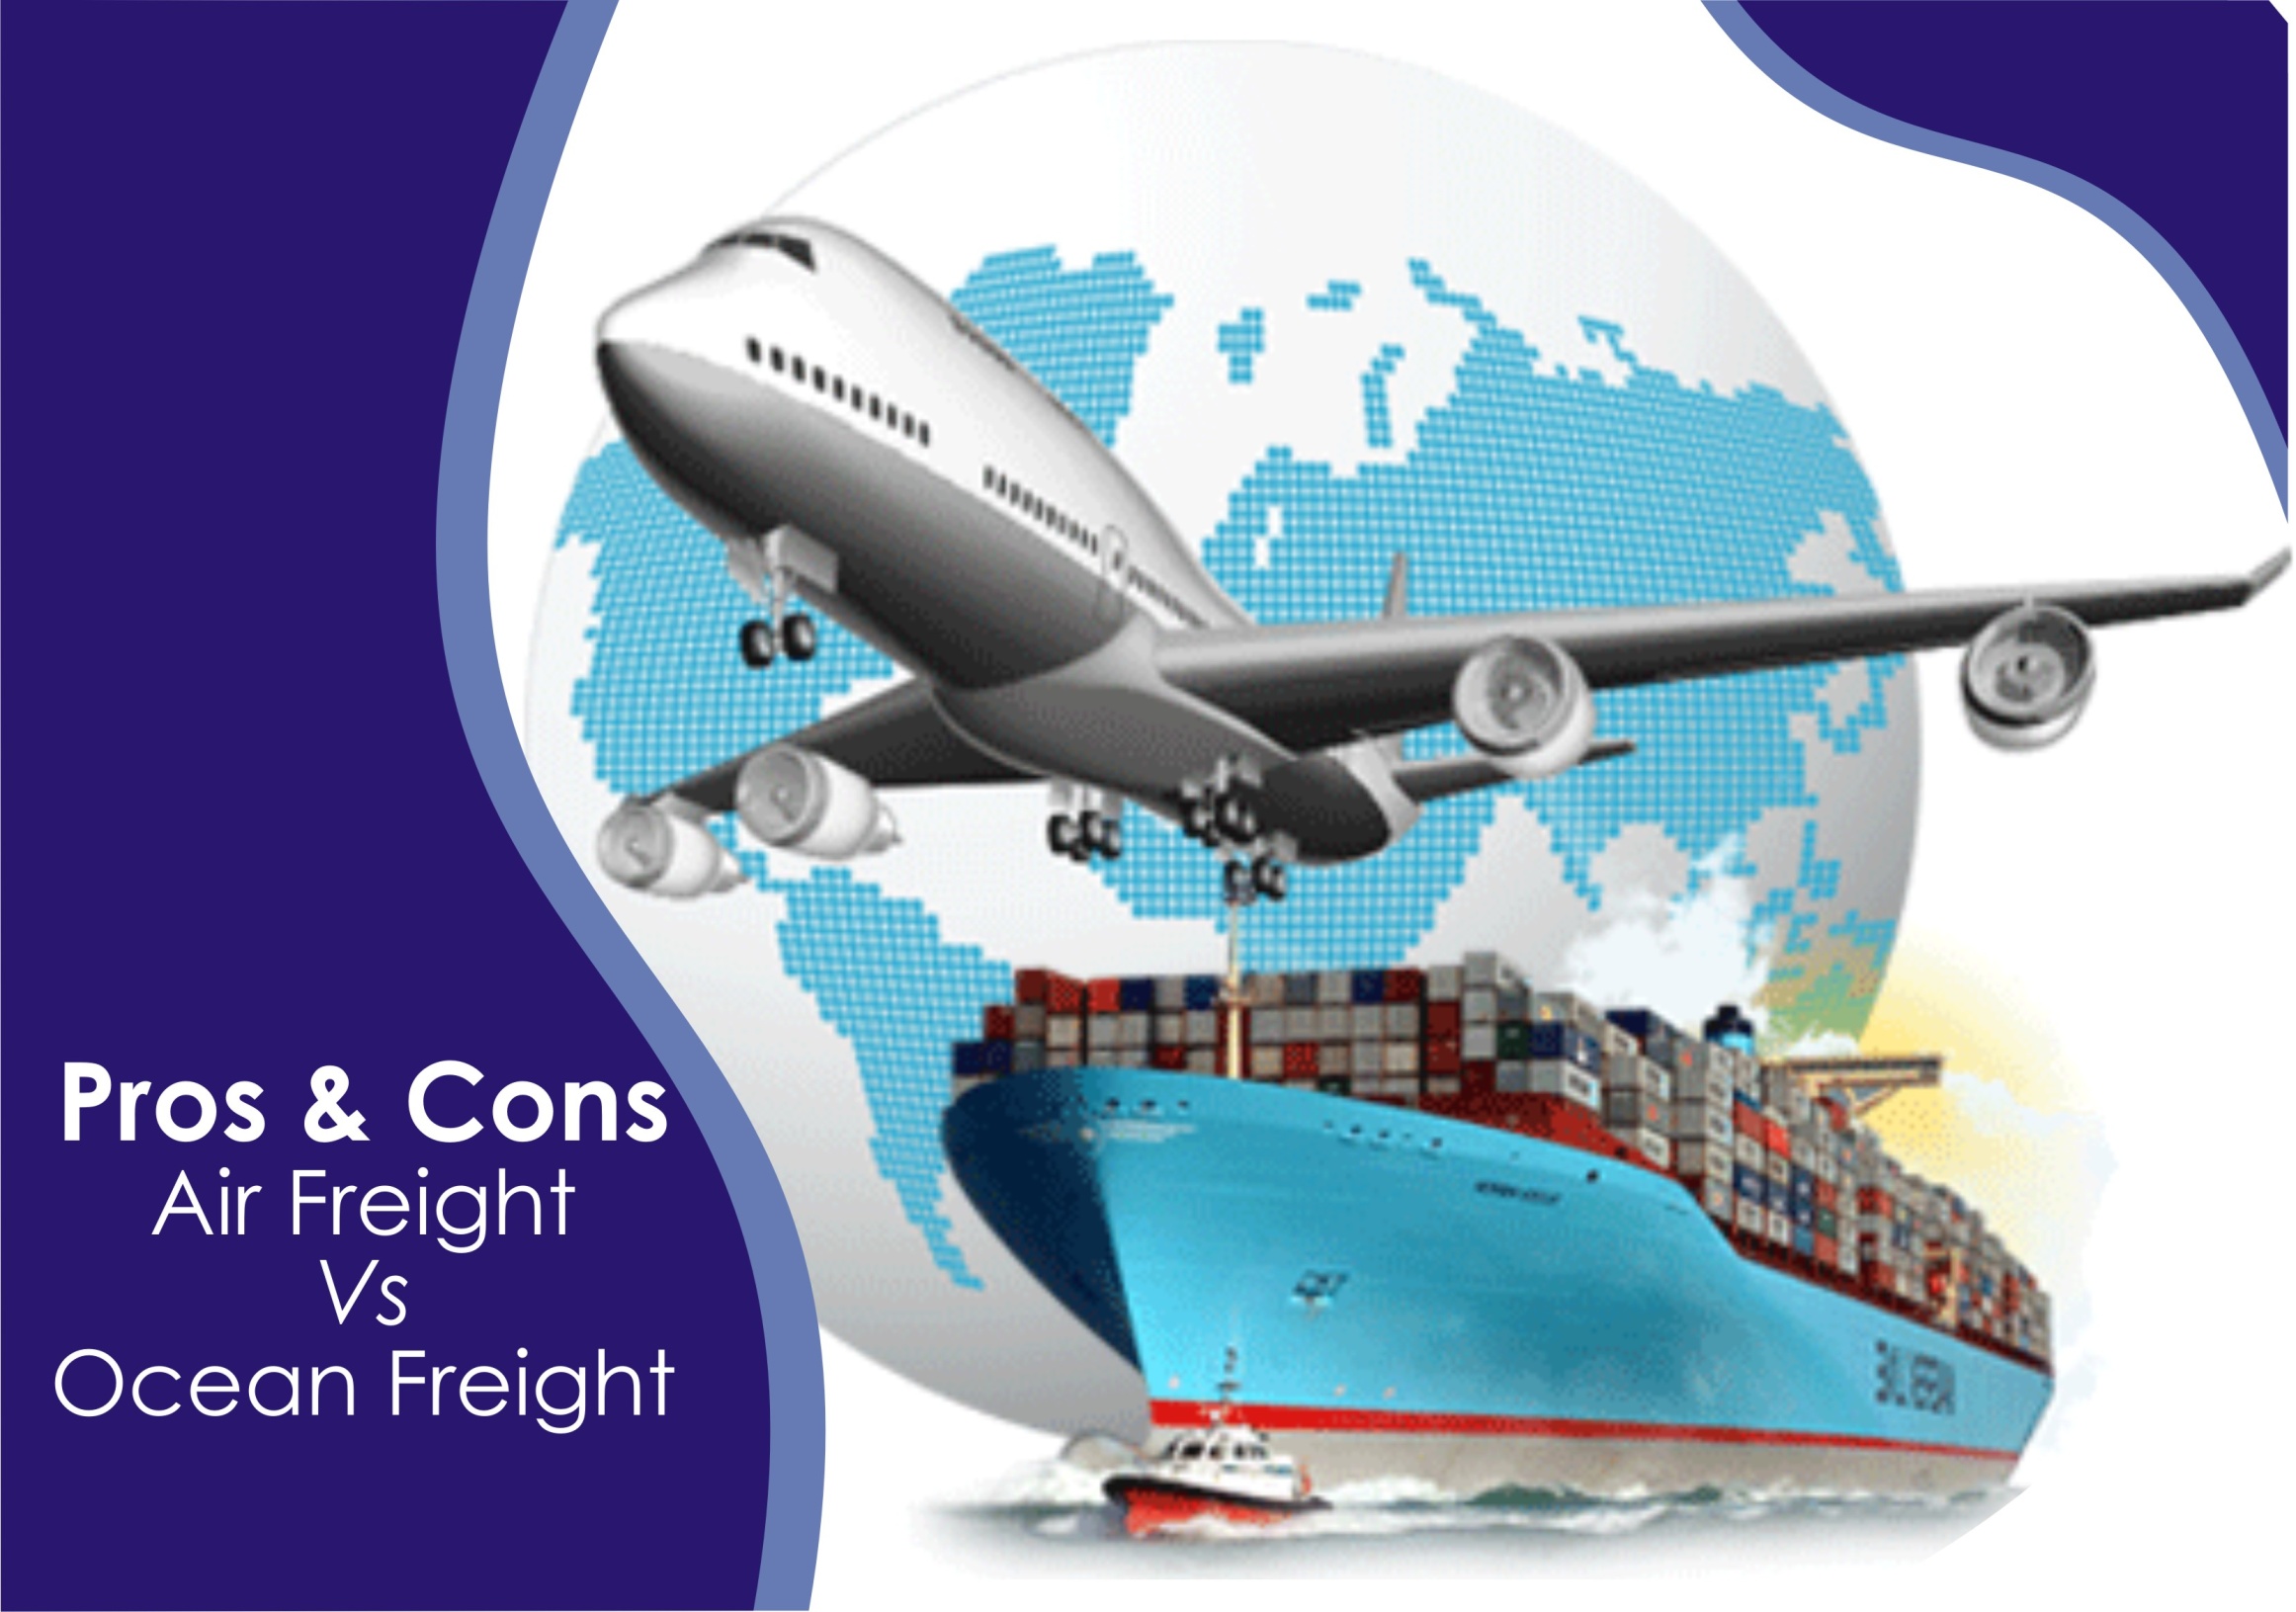 Pros and Cons of Air Freight Vs Ocean Freight